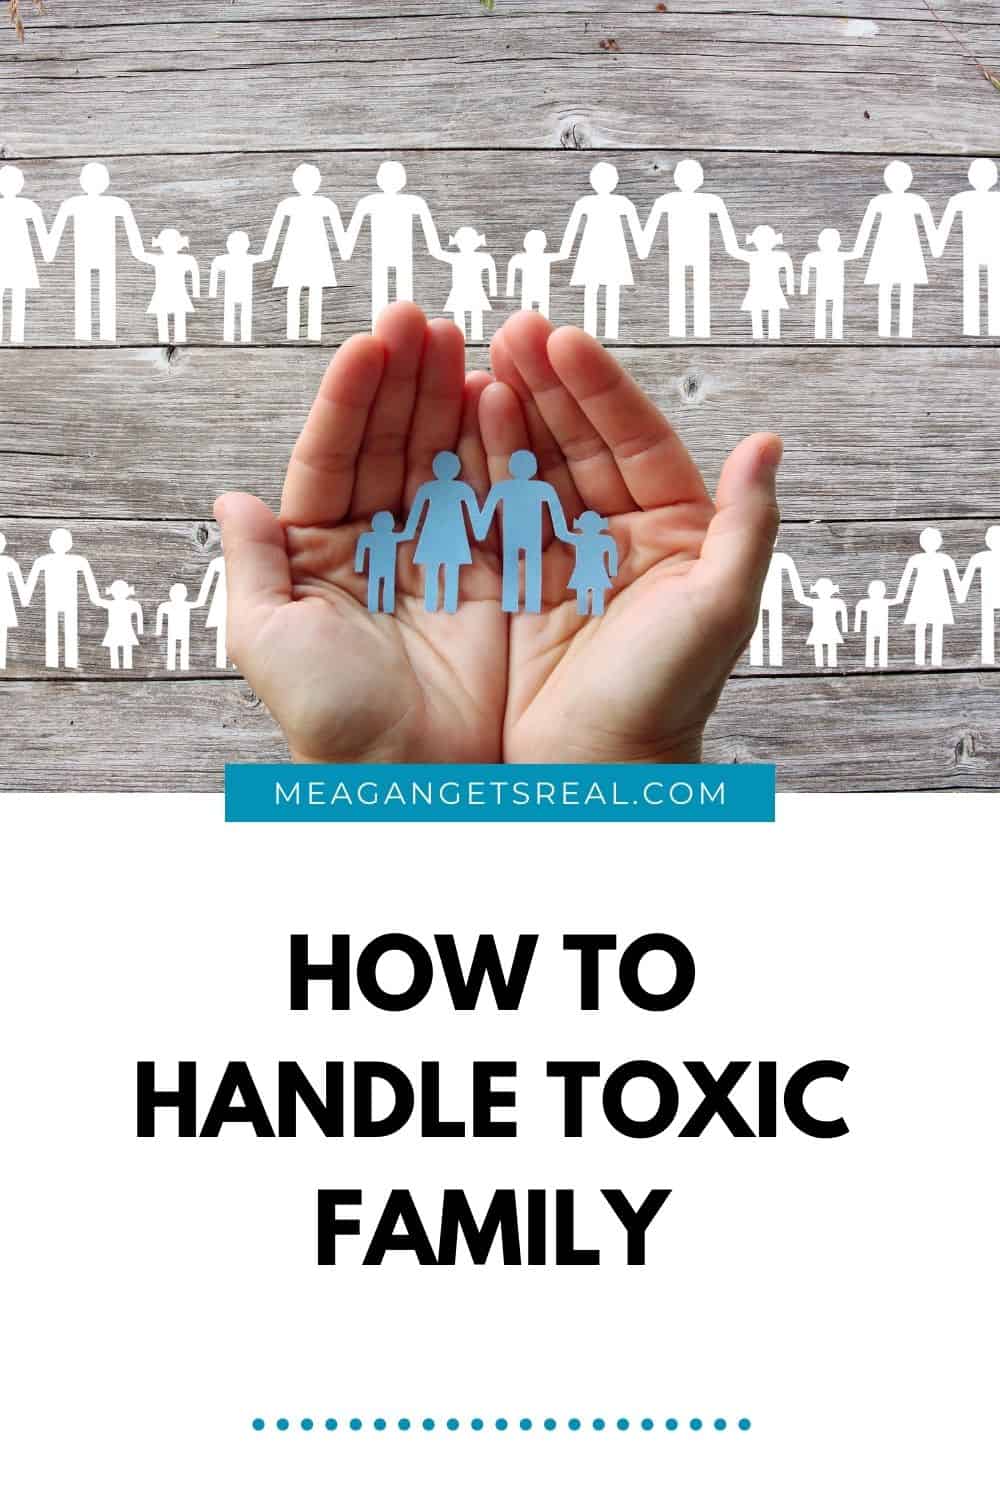 How to handle toxic family- Handing parenting when family members are toxic can be overwhelming. Don't do it alone with these tips. 